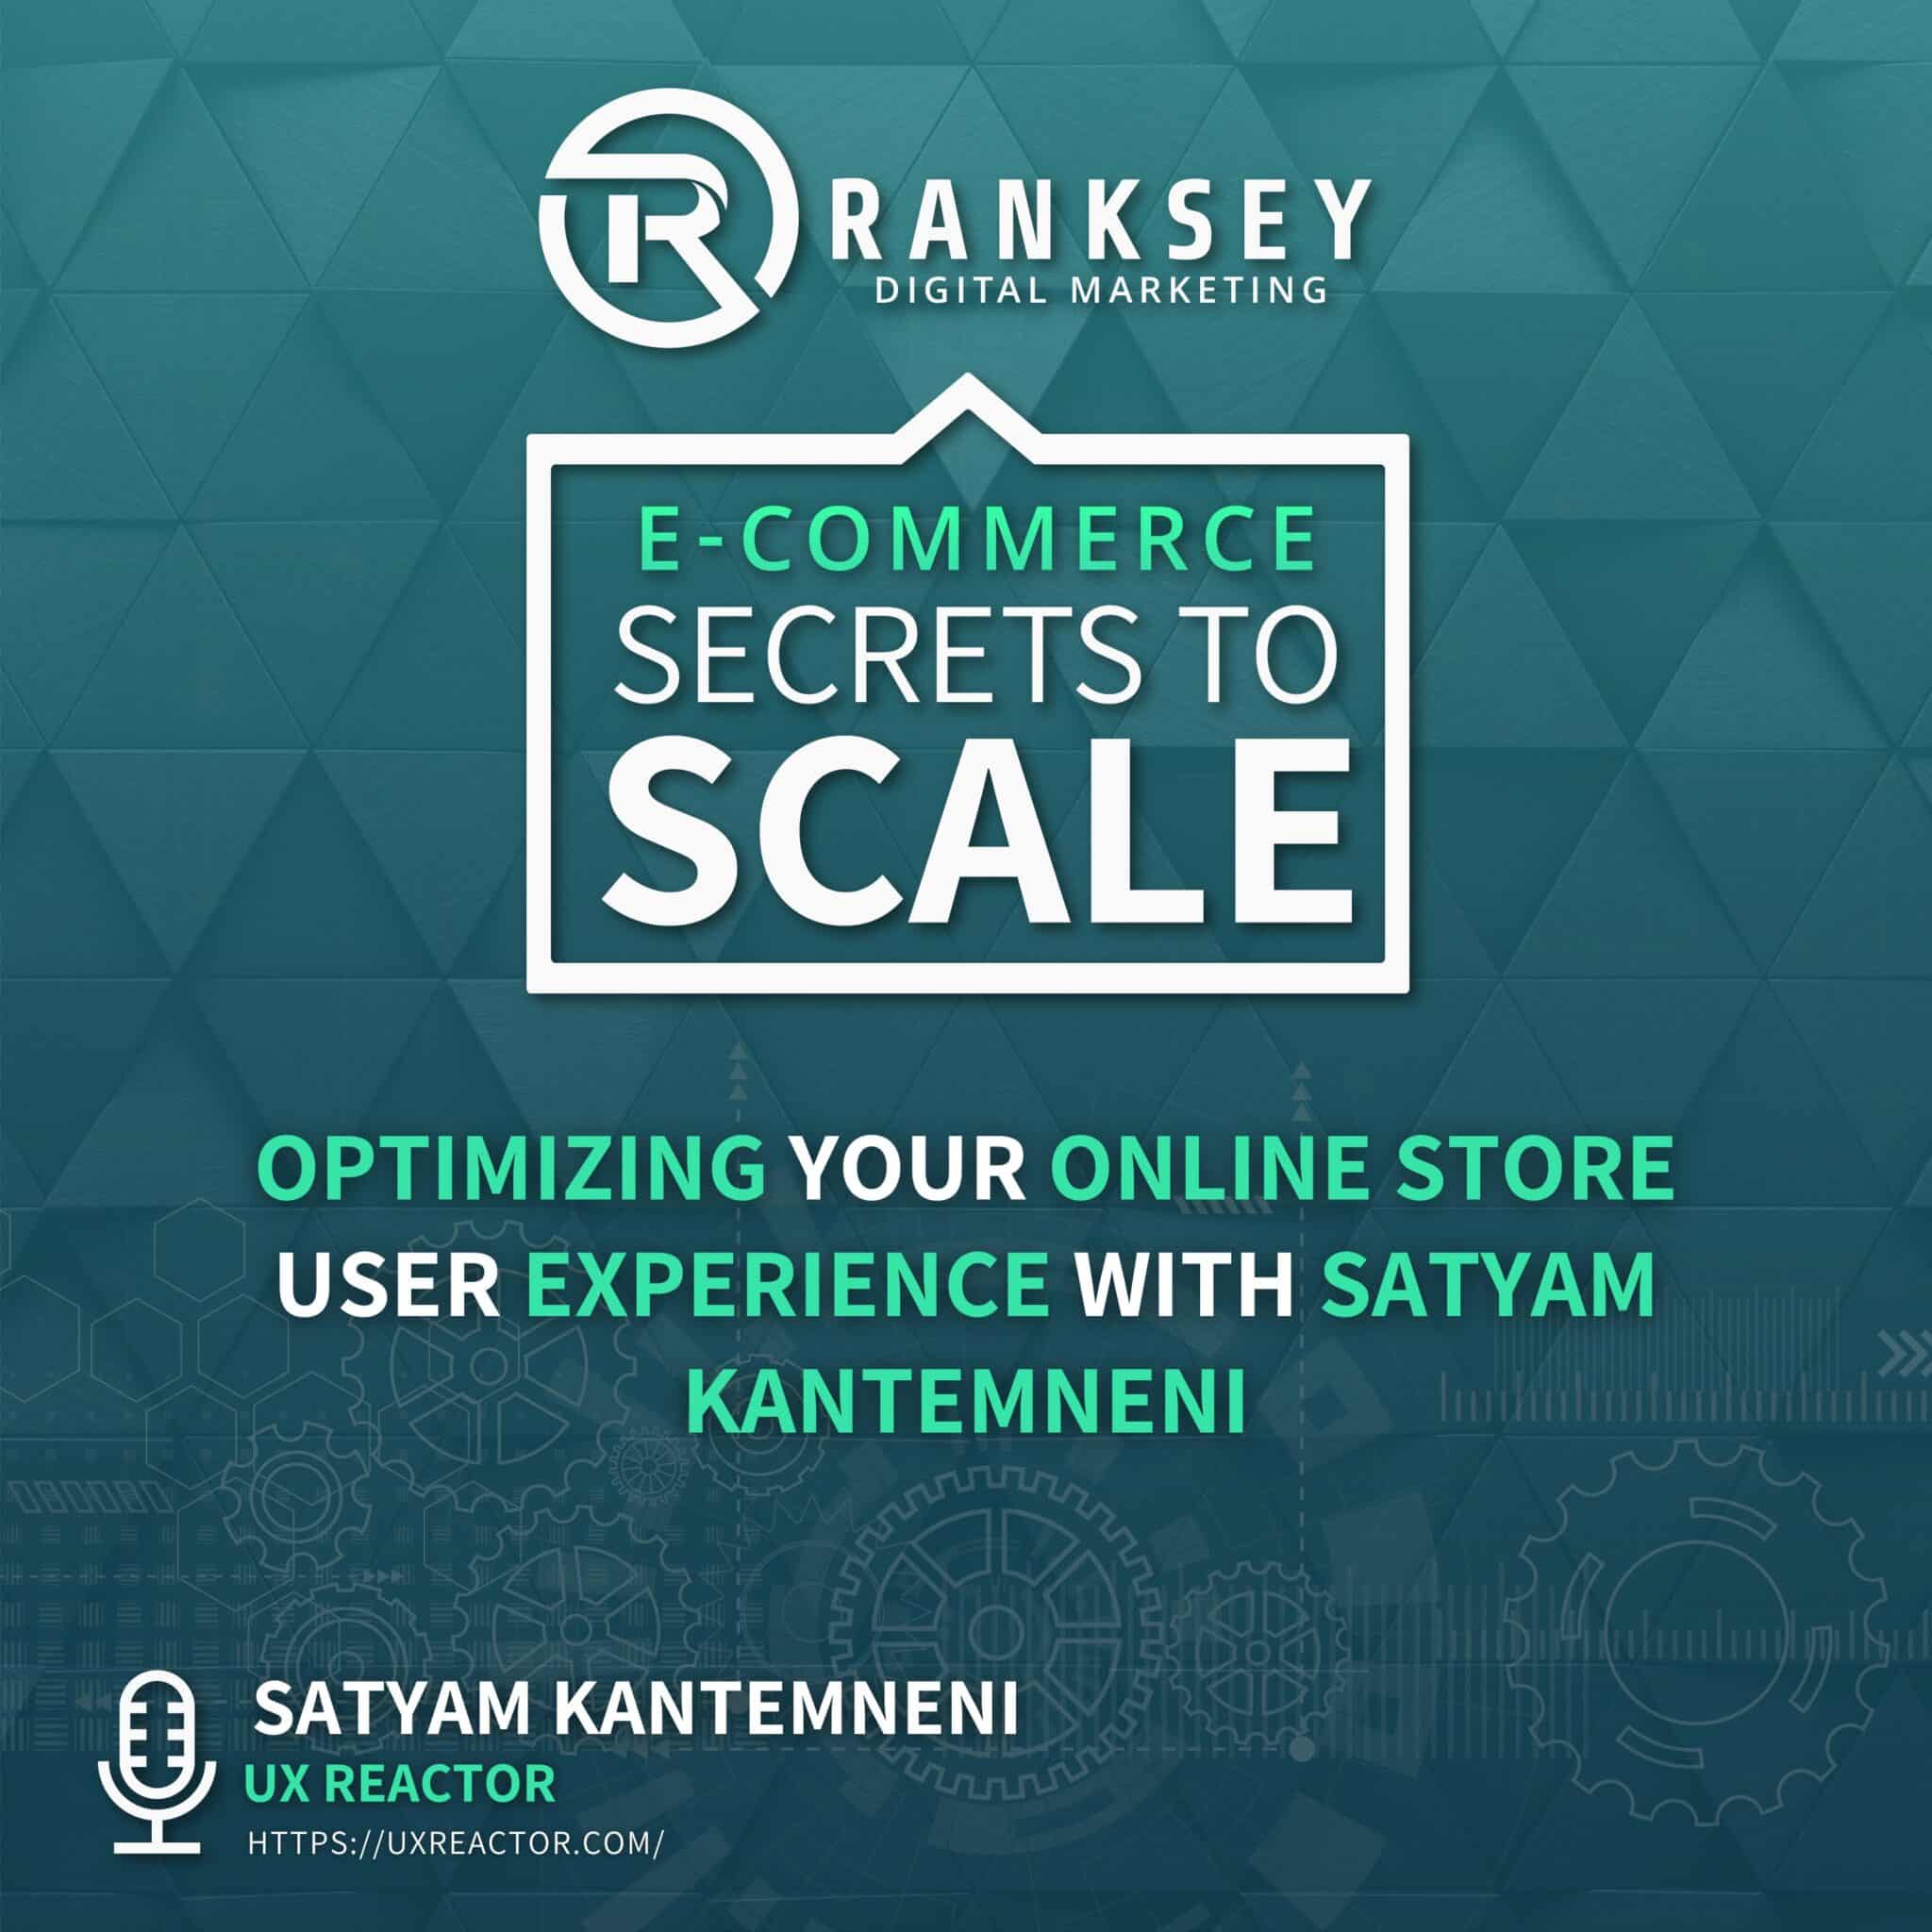 096 - Optimizing Your Online Store User Experience With Satyam Kantemneni